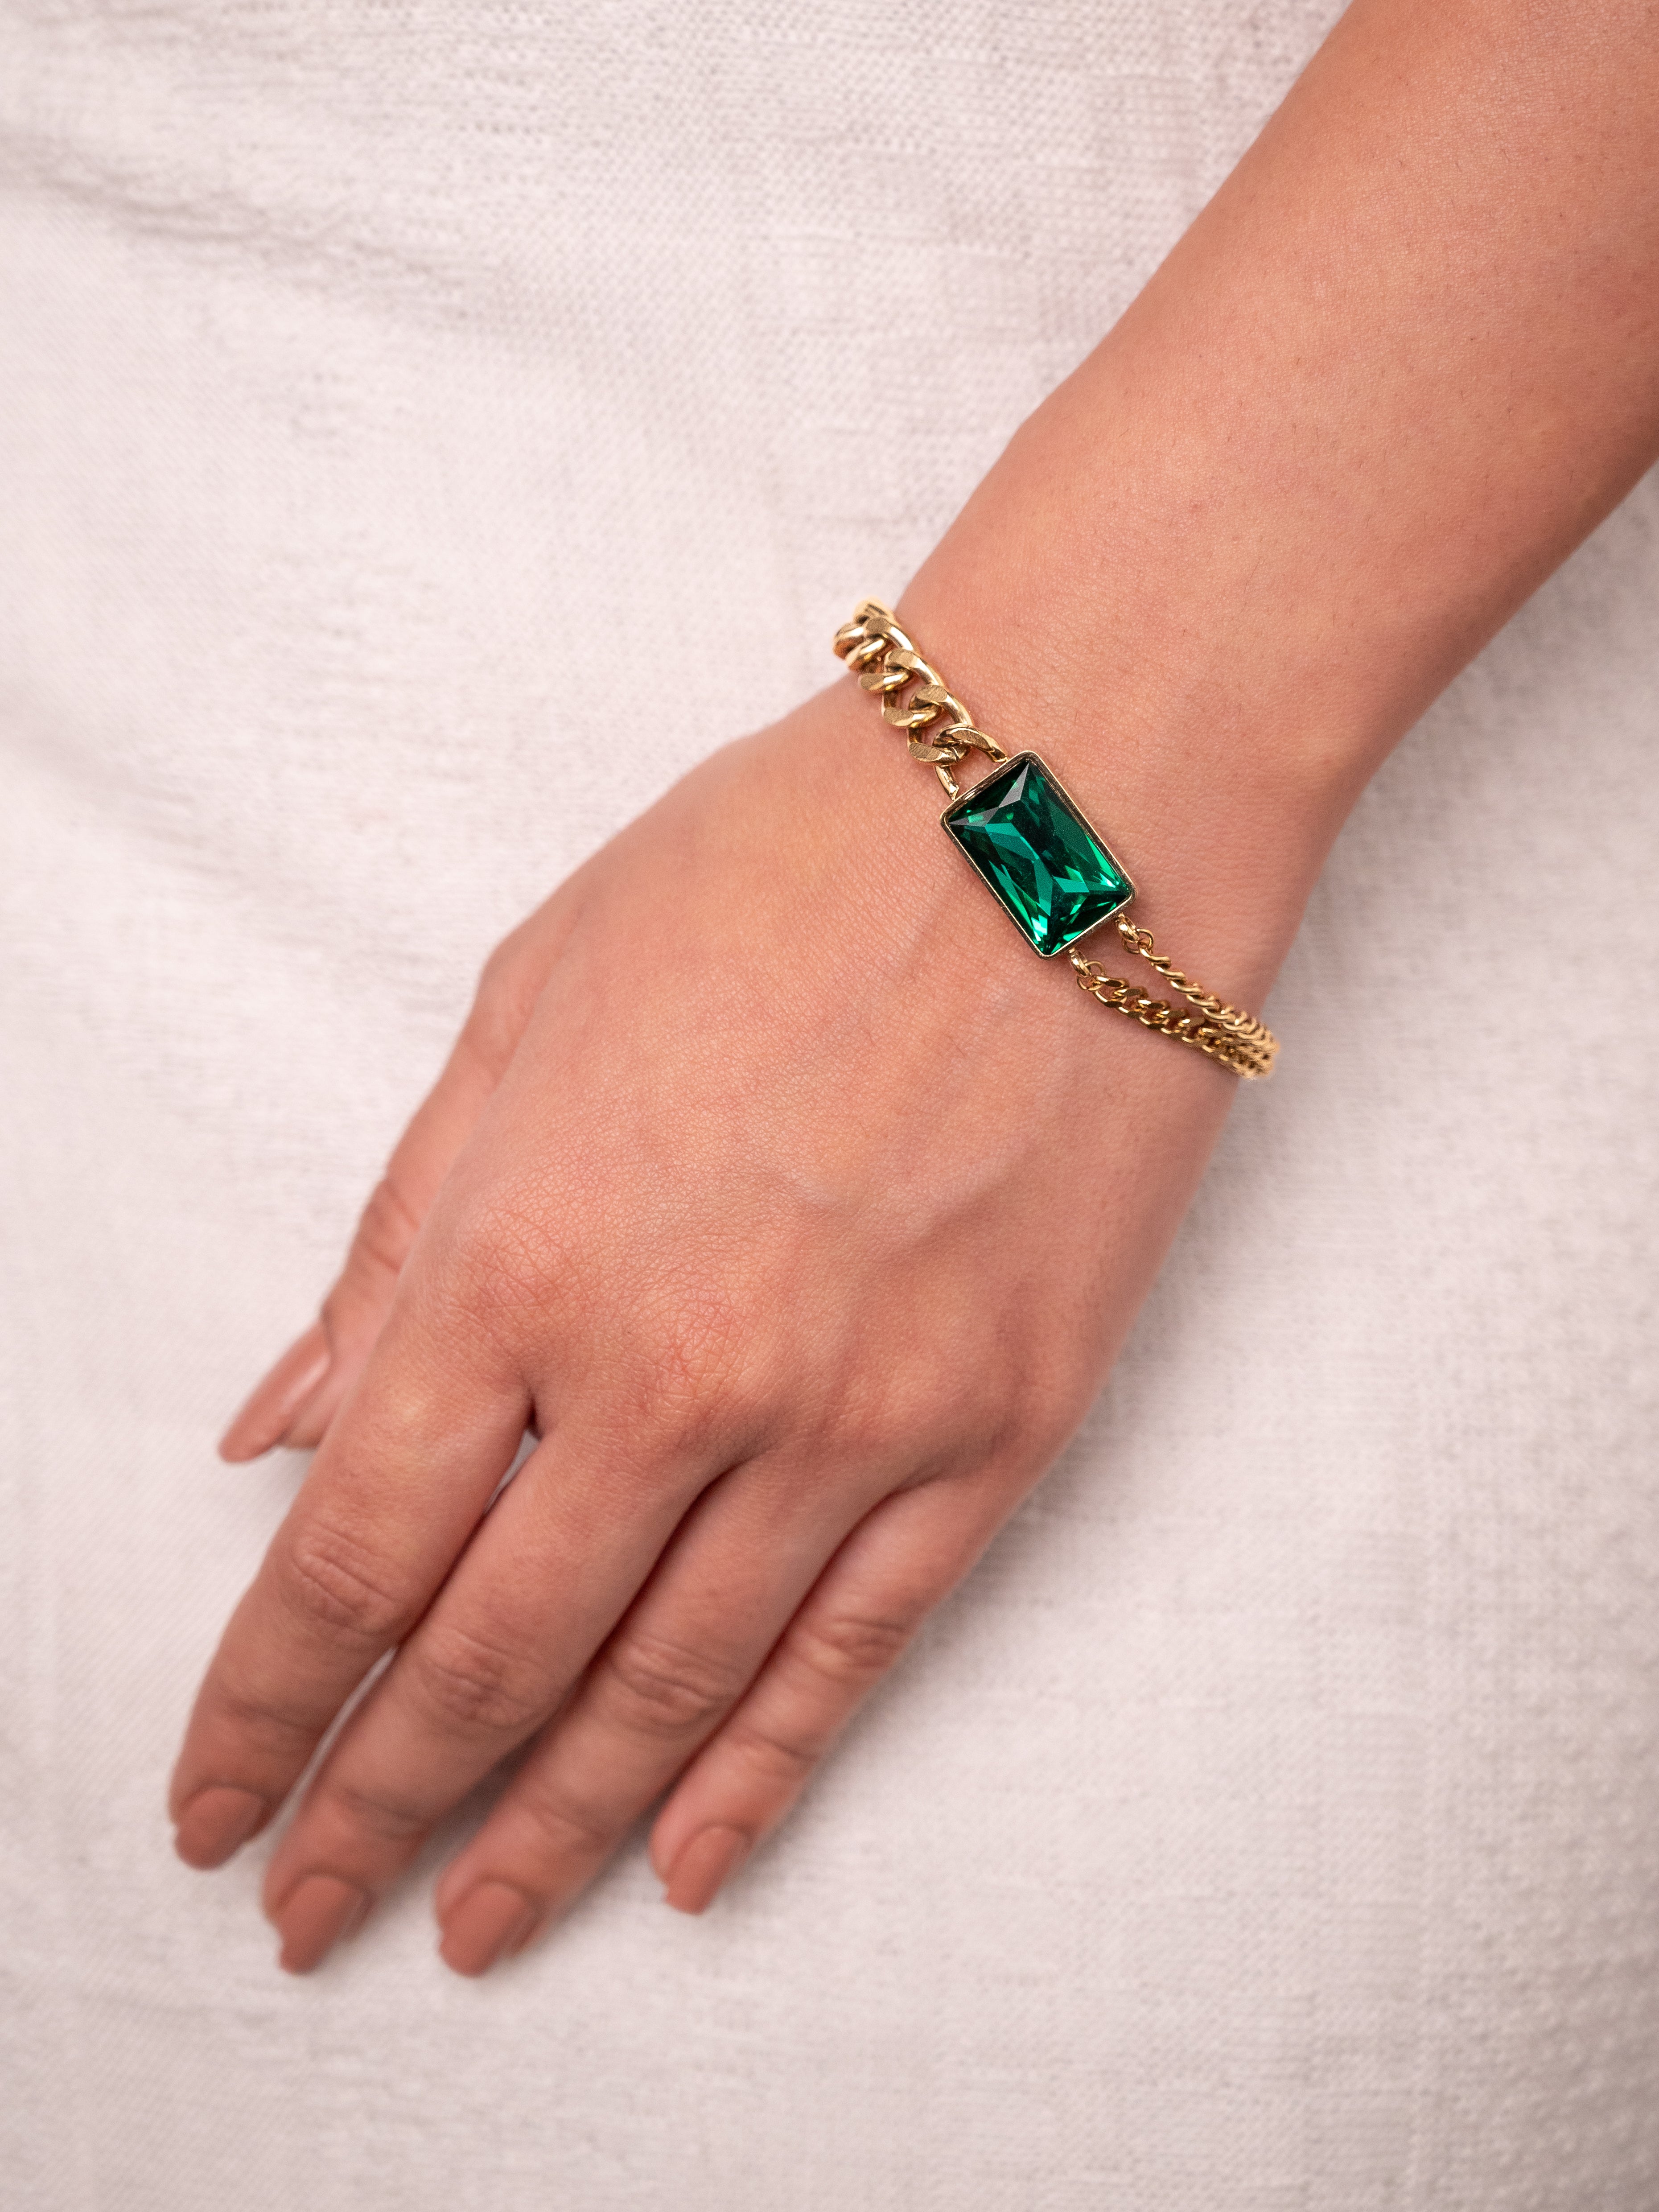 Green Stone Link Chain Bracelet| 18k Gold Plated